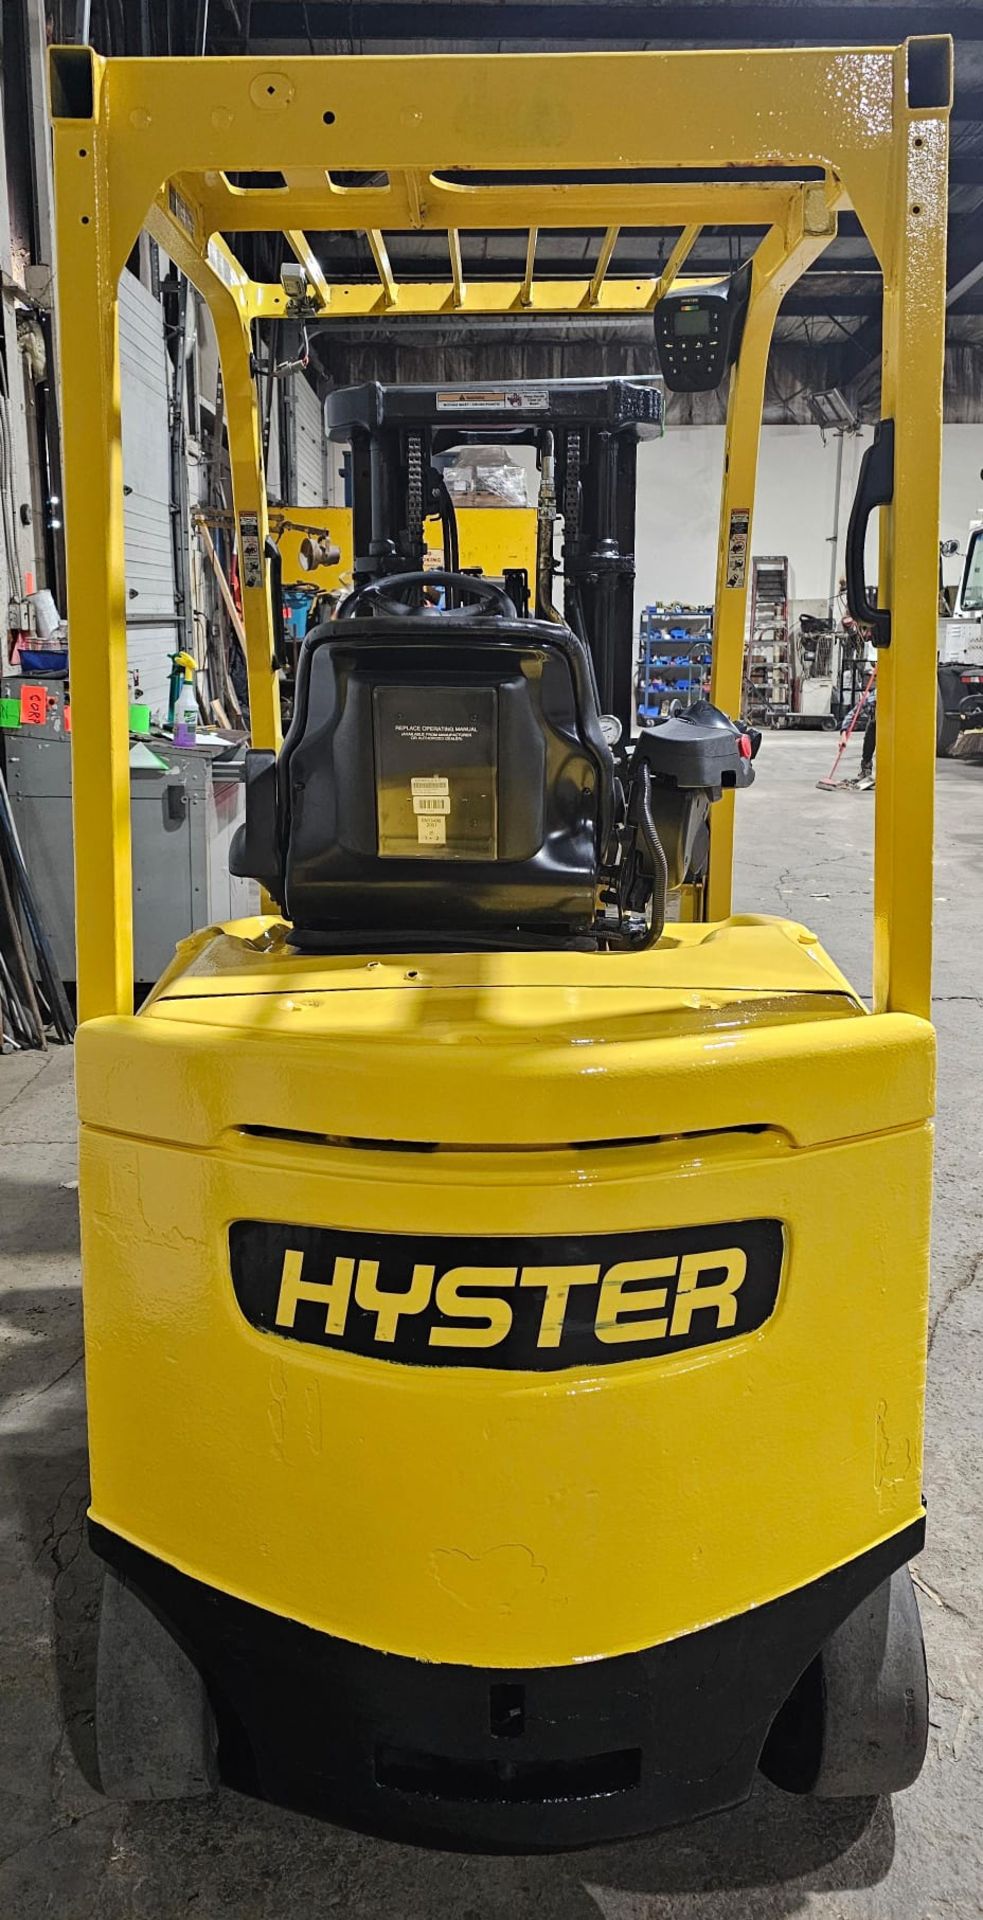 2010 Hyster 4,500lbs Capacity Electric Forklift 48v sideshift 3-STAGE MAST 189" load height - Image 7 of 11